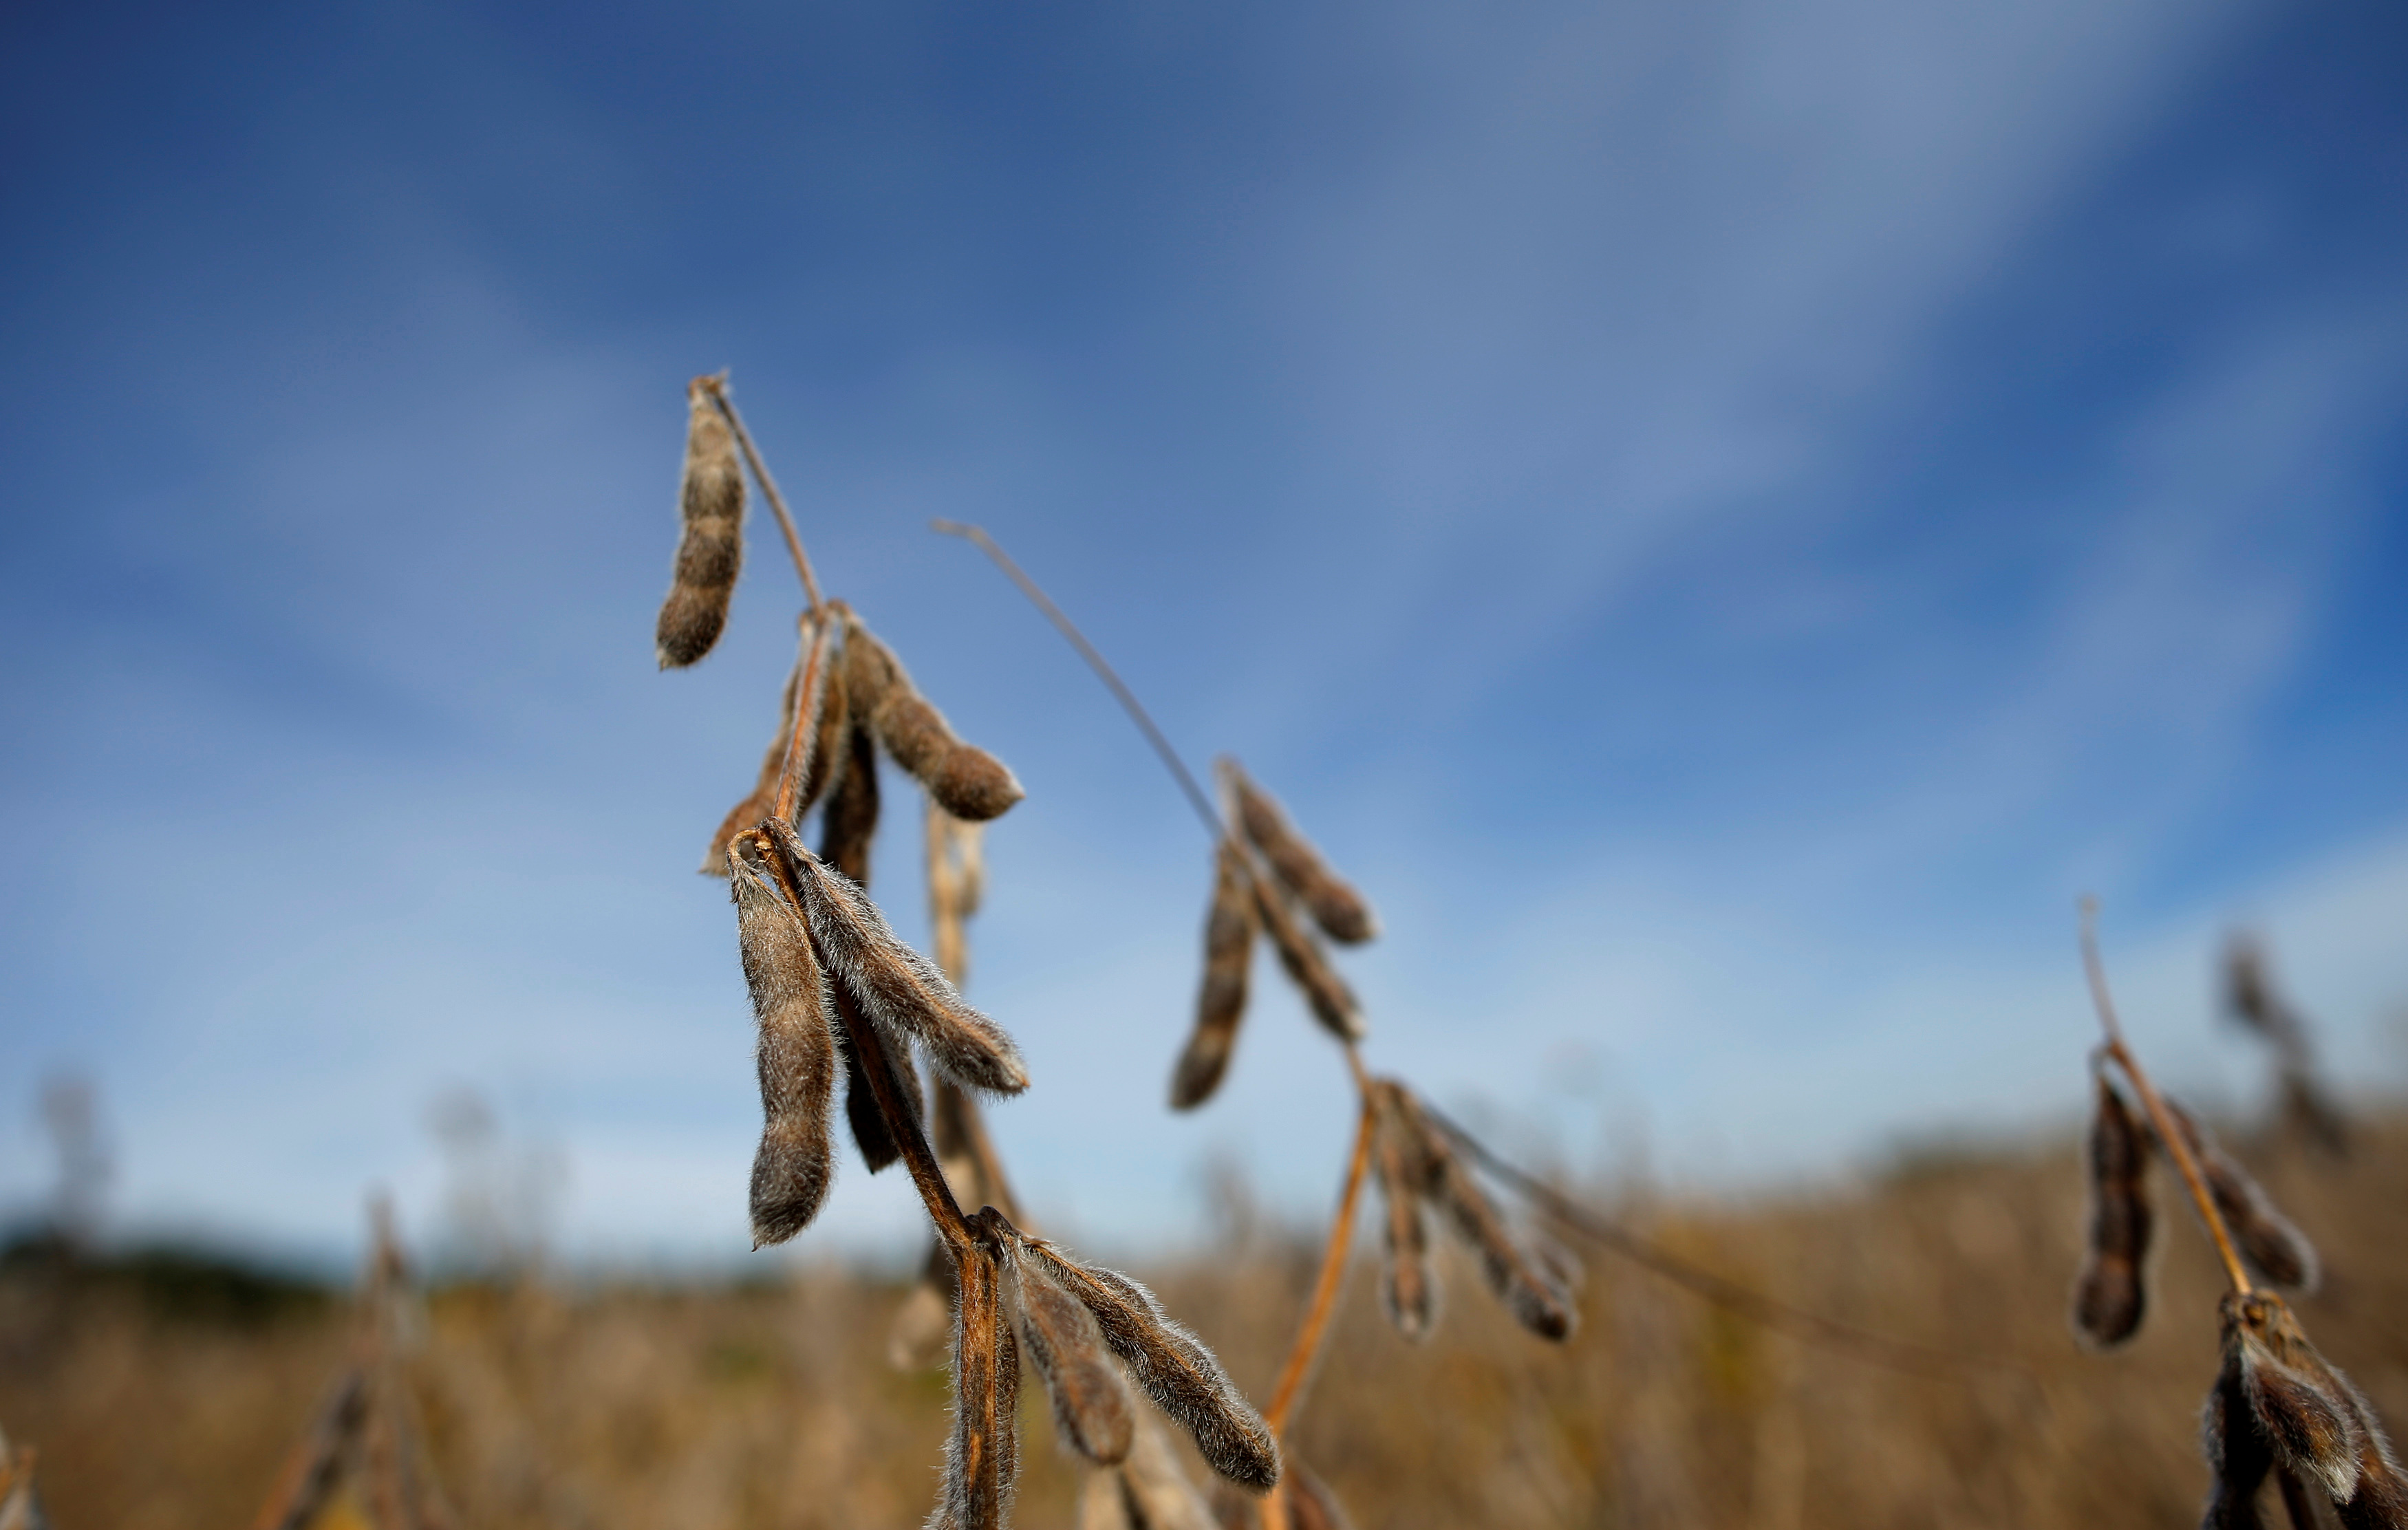 Soybeans are seen in a field waiting to be harvested in Minooka, Illinois